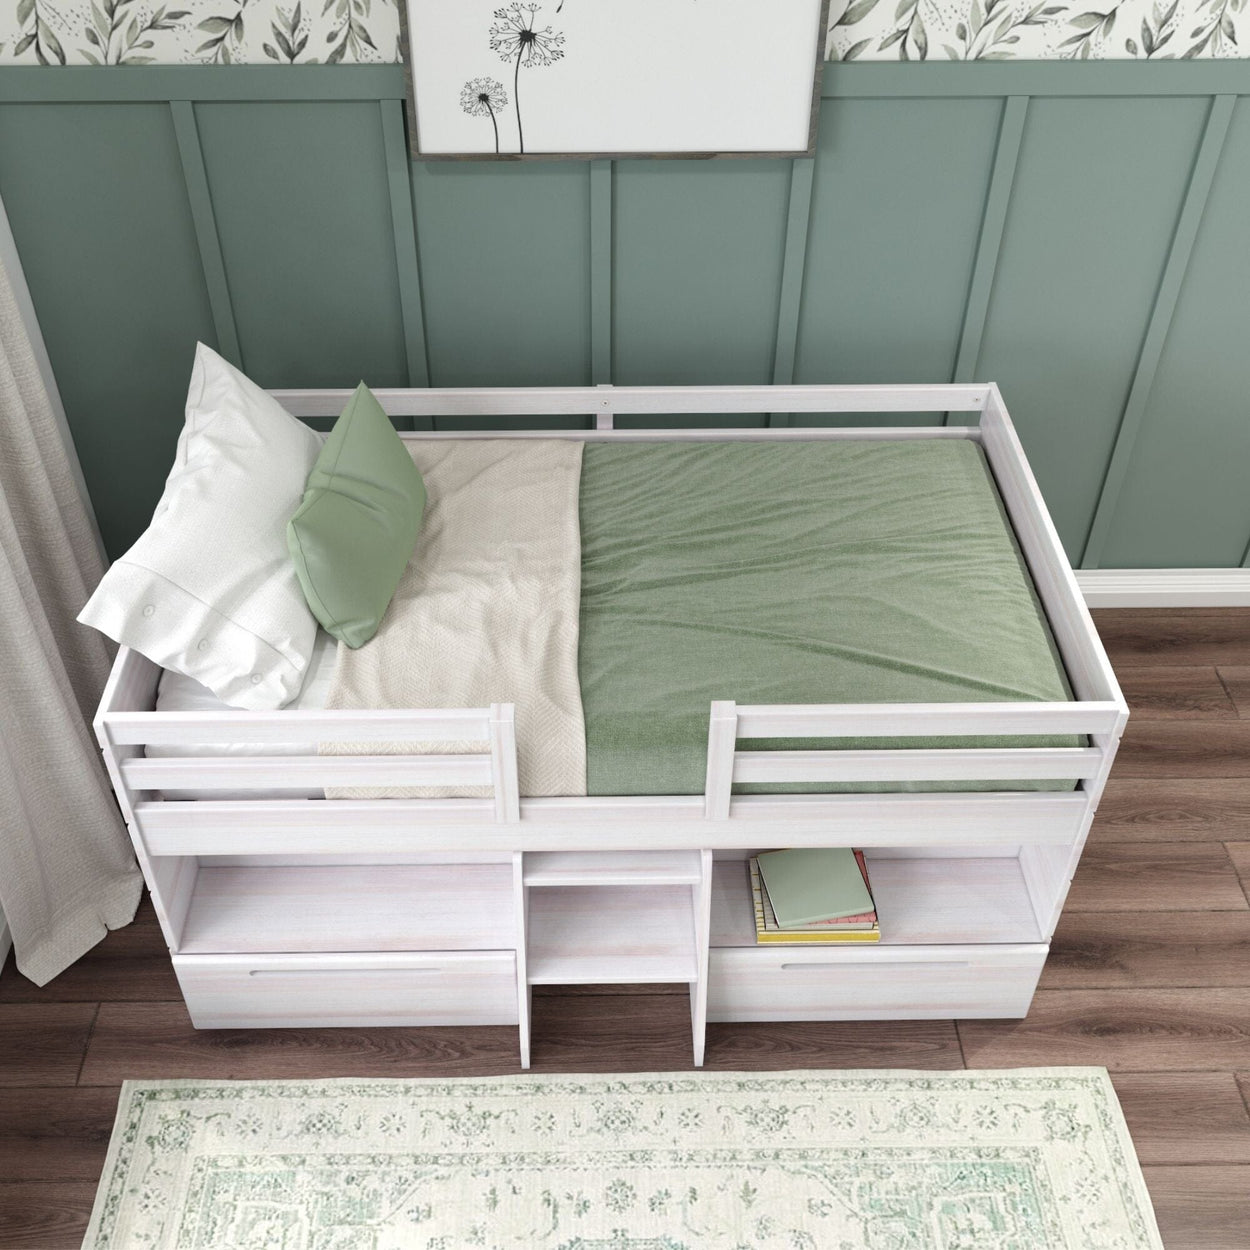 Loft Beds Max & Lily Modern Farmhouse Twin-Size Low Loft with Two Drawers 